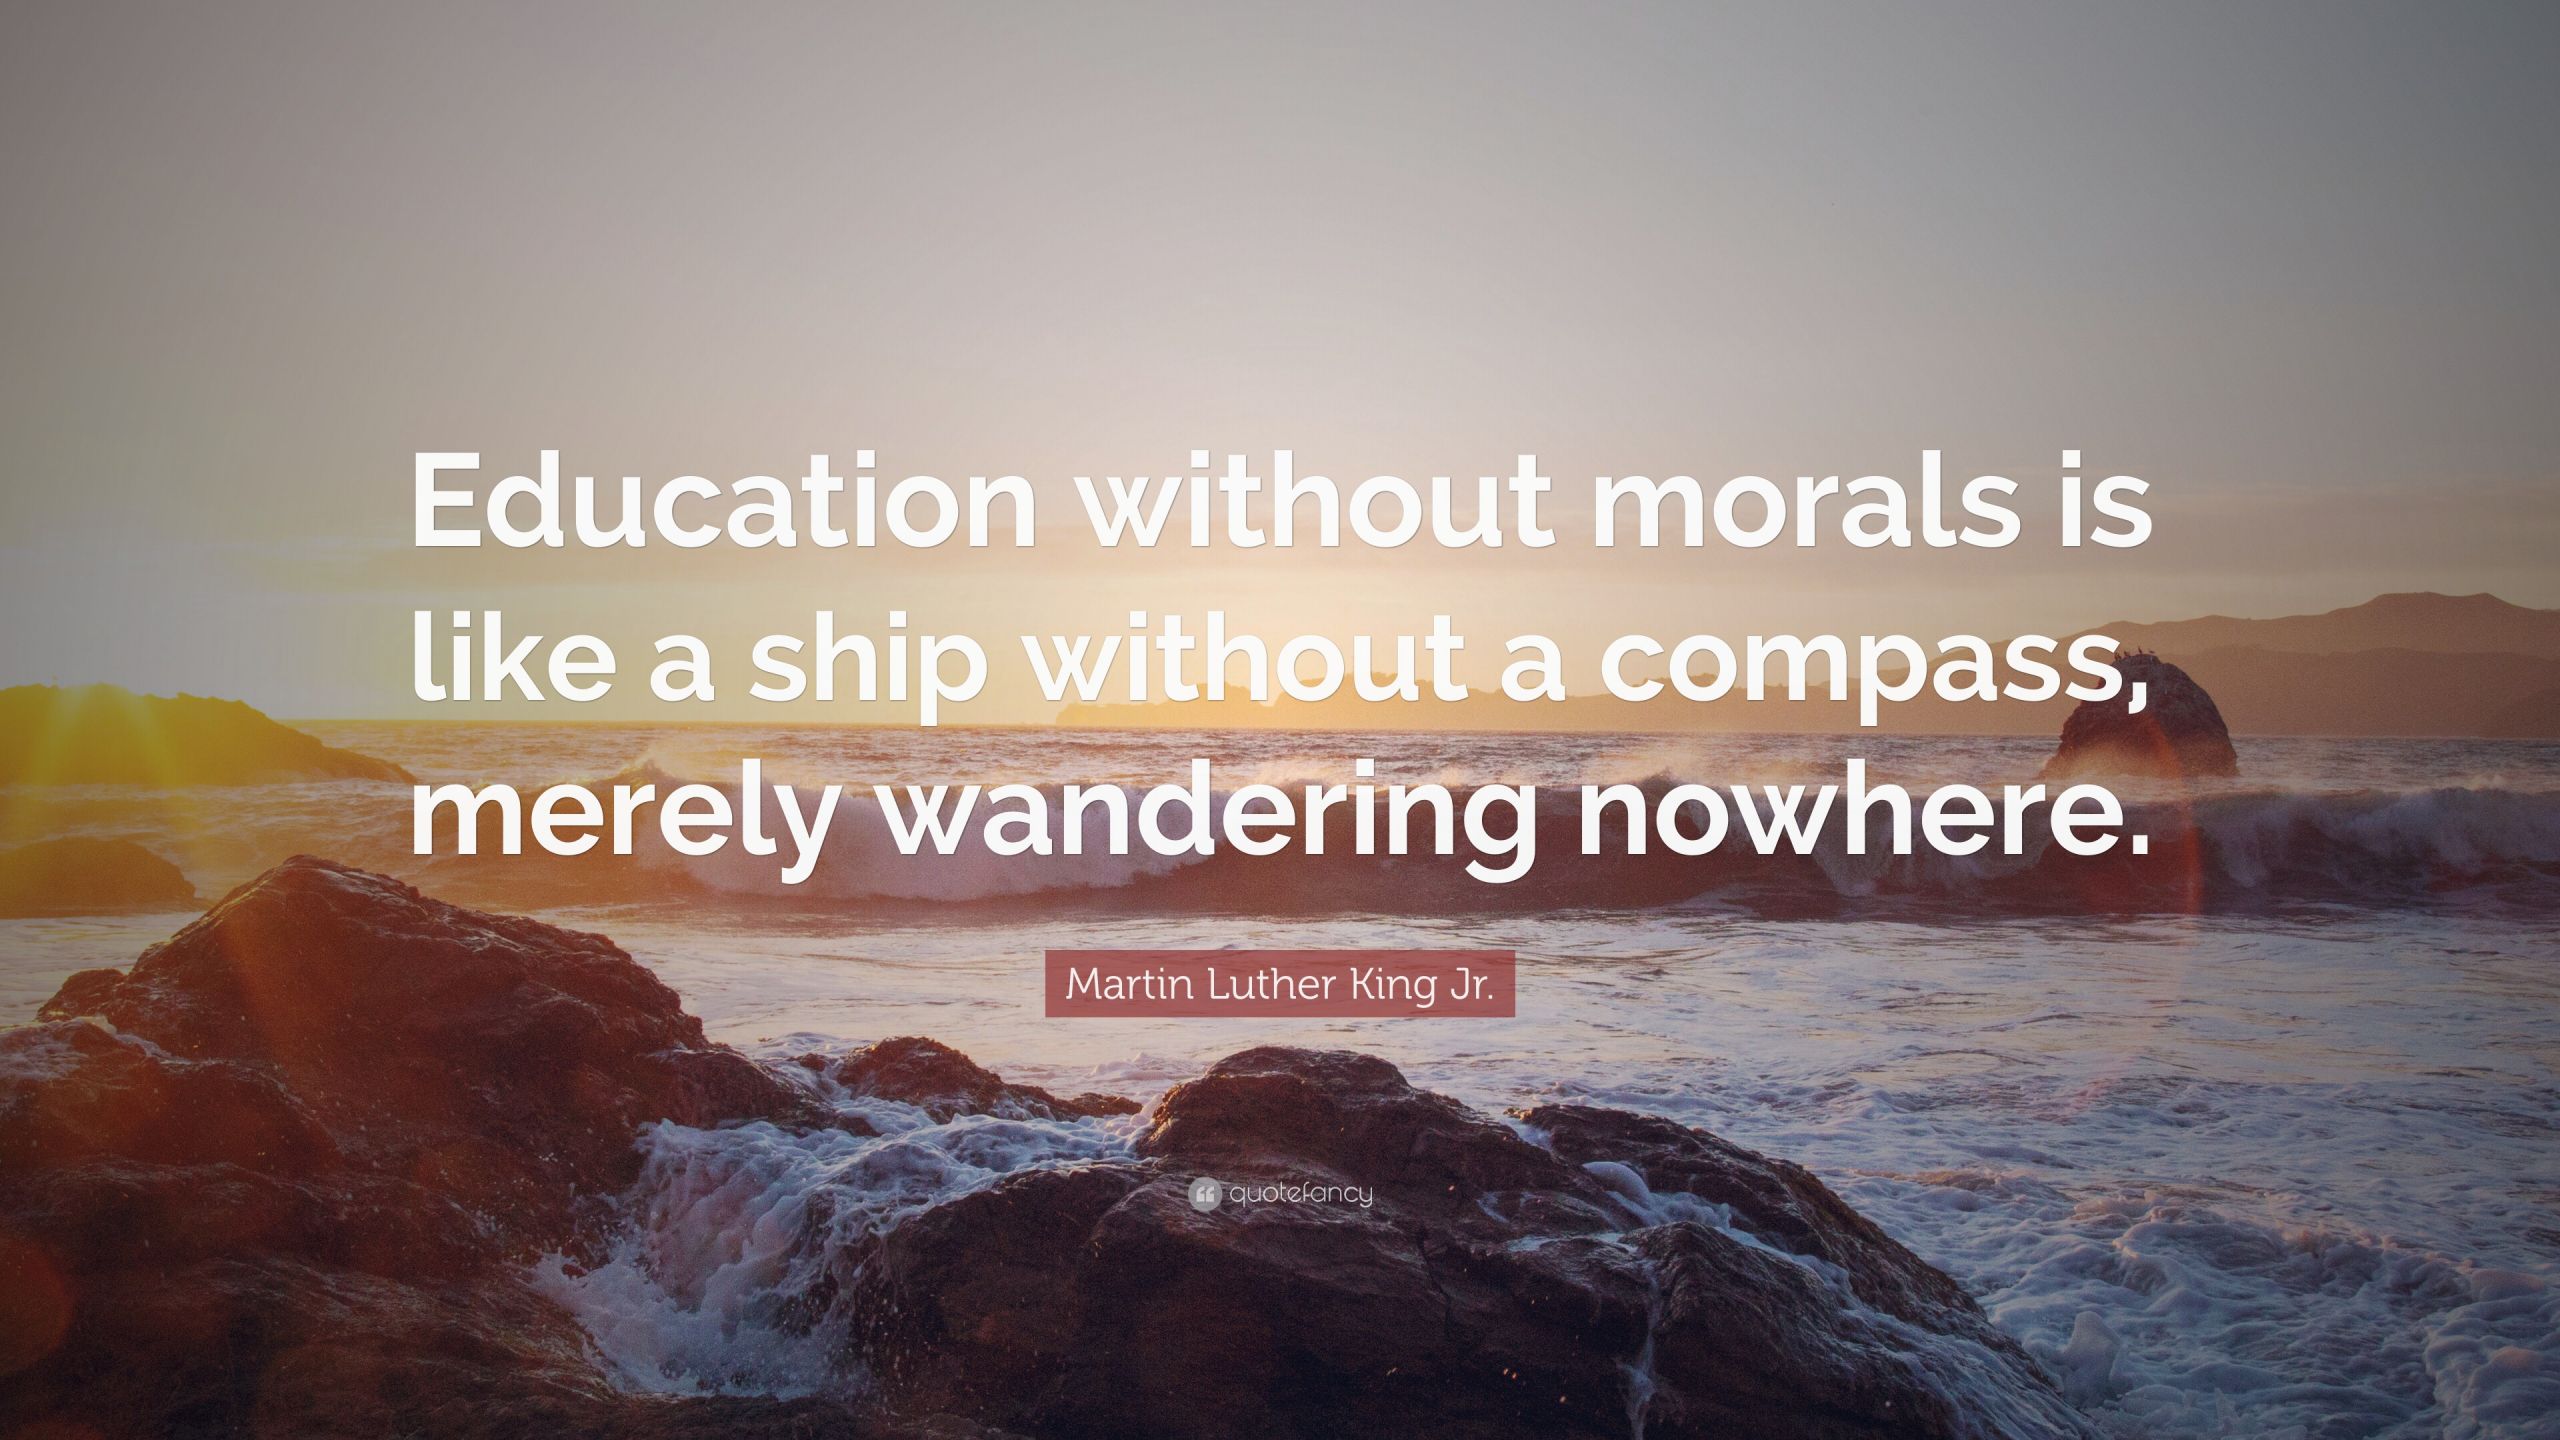 Martin Luther King Quotes On Education
 Martin Luther King Jr Quote “Education without morals is